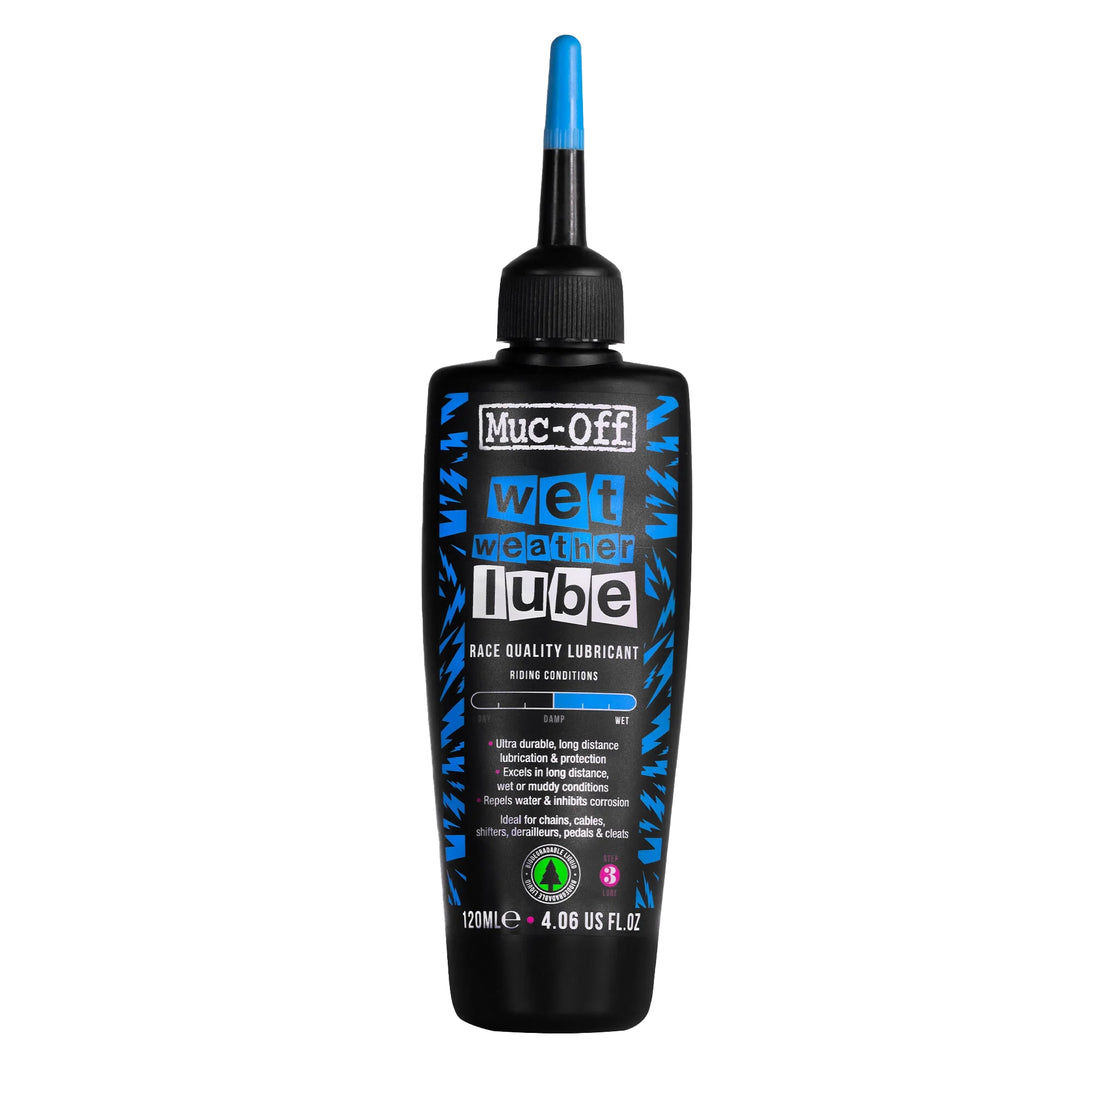 Muc-Off Wet Weather Chain Lube 120ml